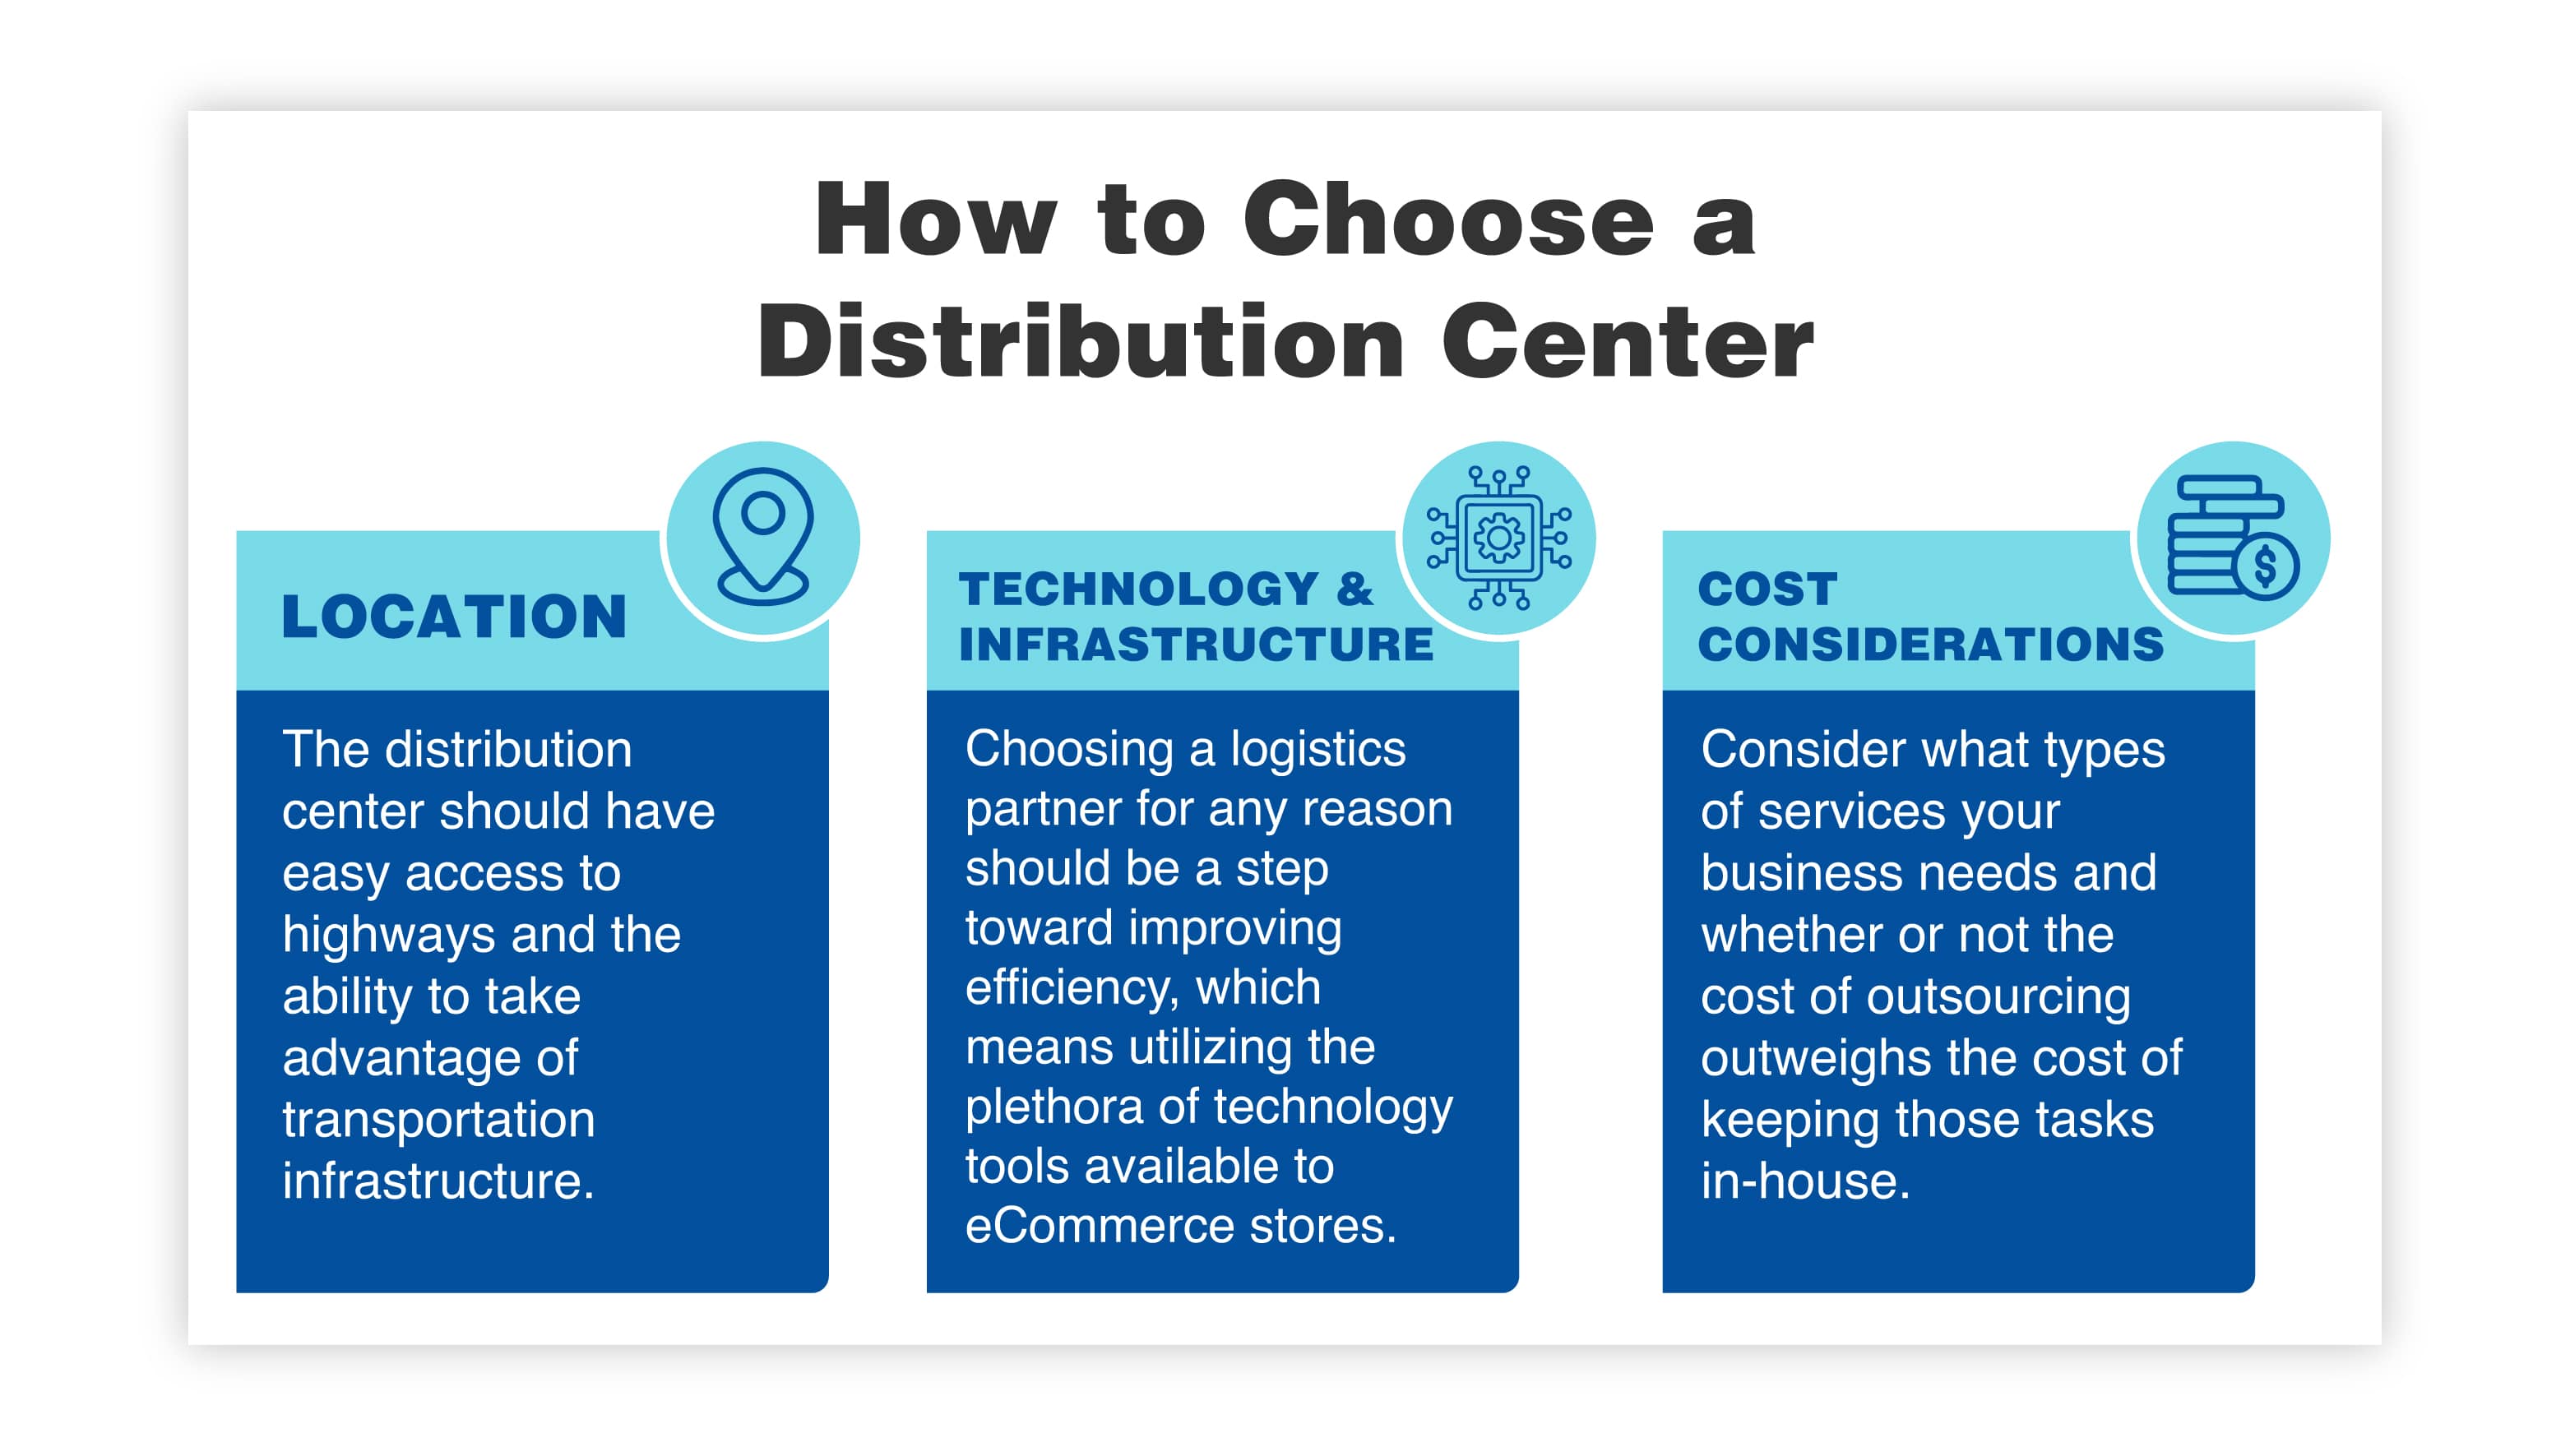 How to Choose a Distribution Center